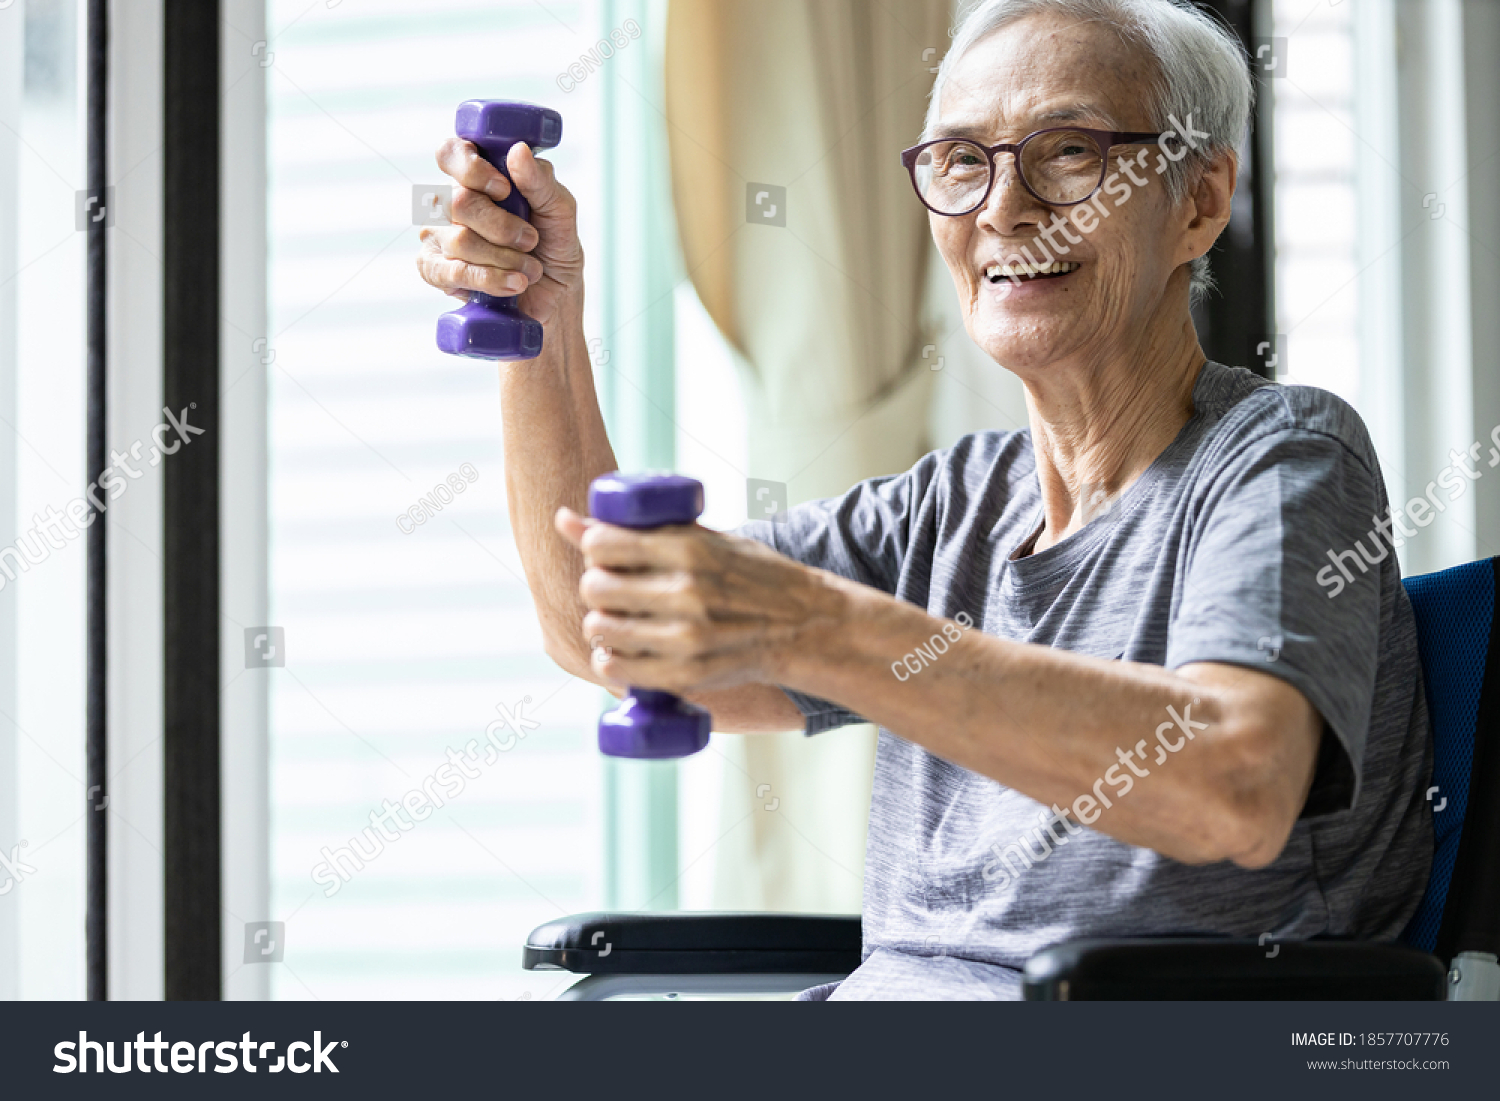 Strong asian senior woman working out with heavy dumbbells,lifting dumbbell weights for strength training,fitness elderly people doing exercise while sit in wheelchair,health care,healthy lifestyle #1857707776